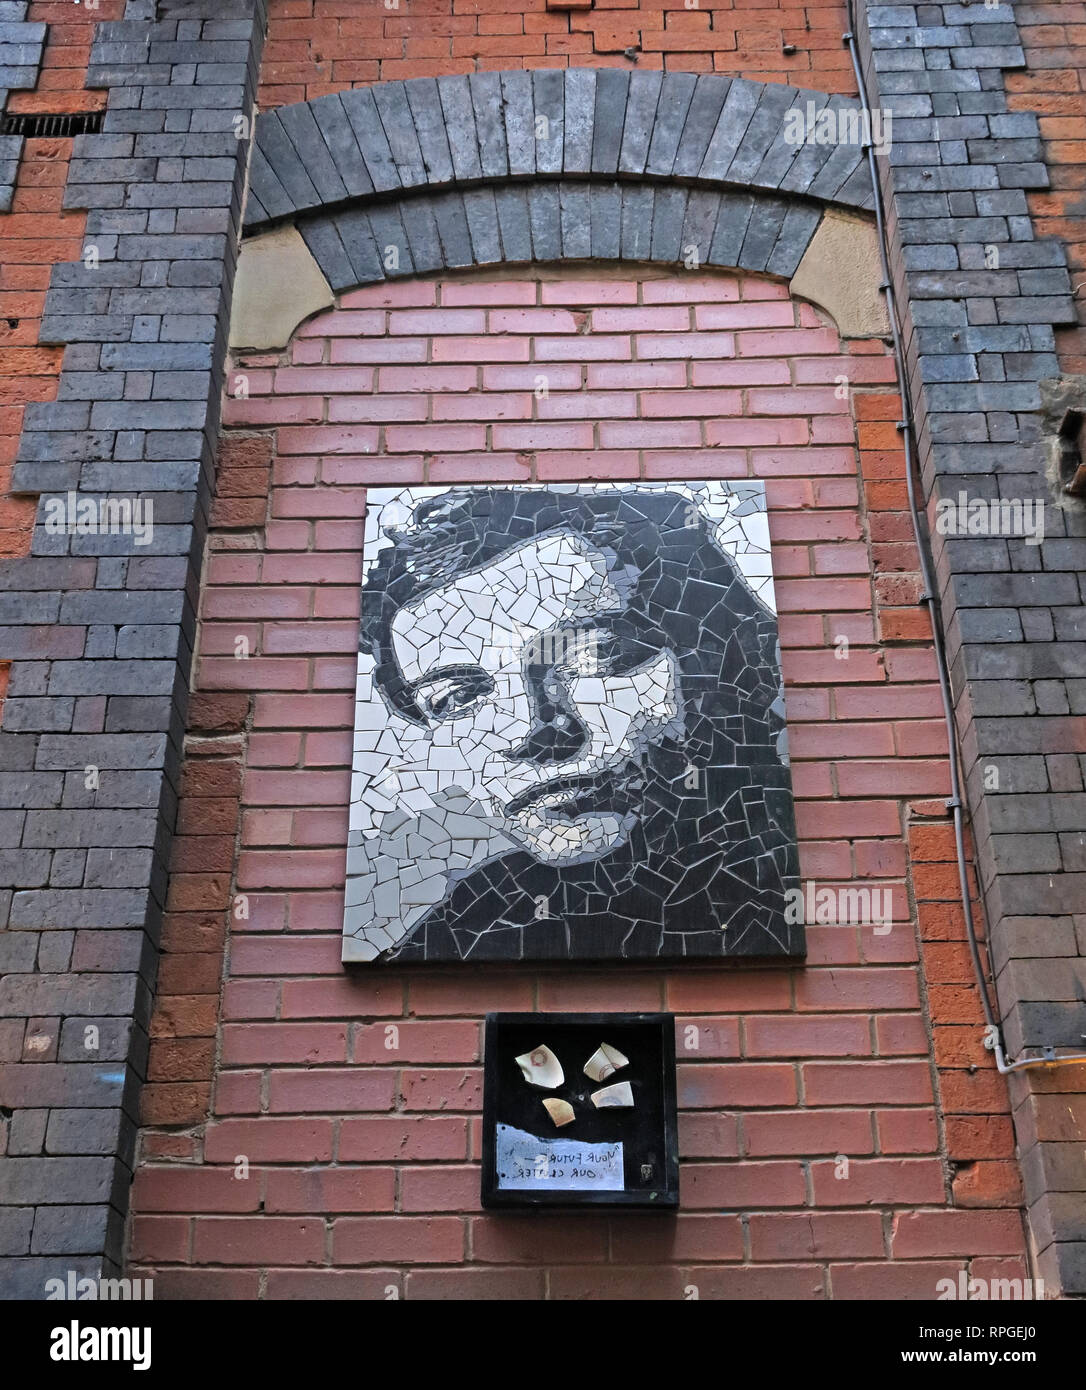 Behind Afflecks Palace, the hidden tribute to Mark E Smith of The Fall worth seeking out on a Manchester back street - commissioned by Mark Kennedy Stock Photo